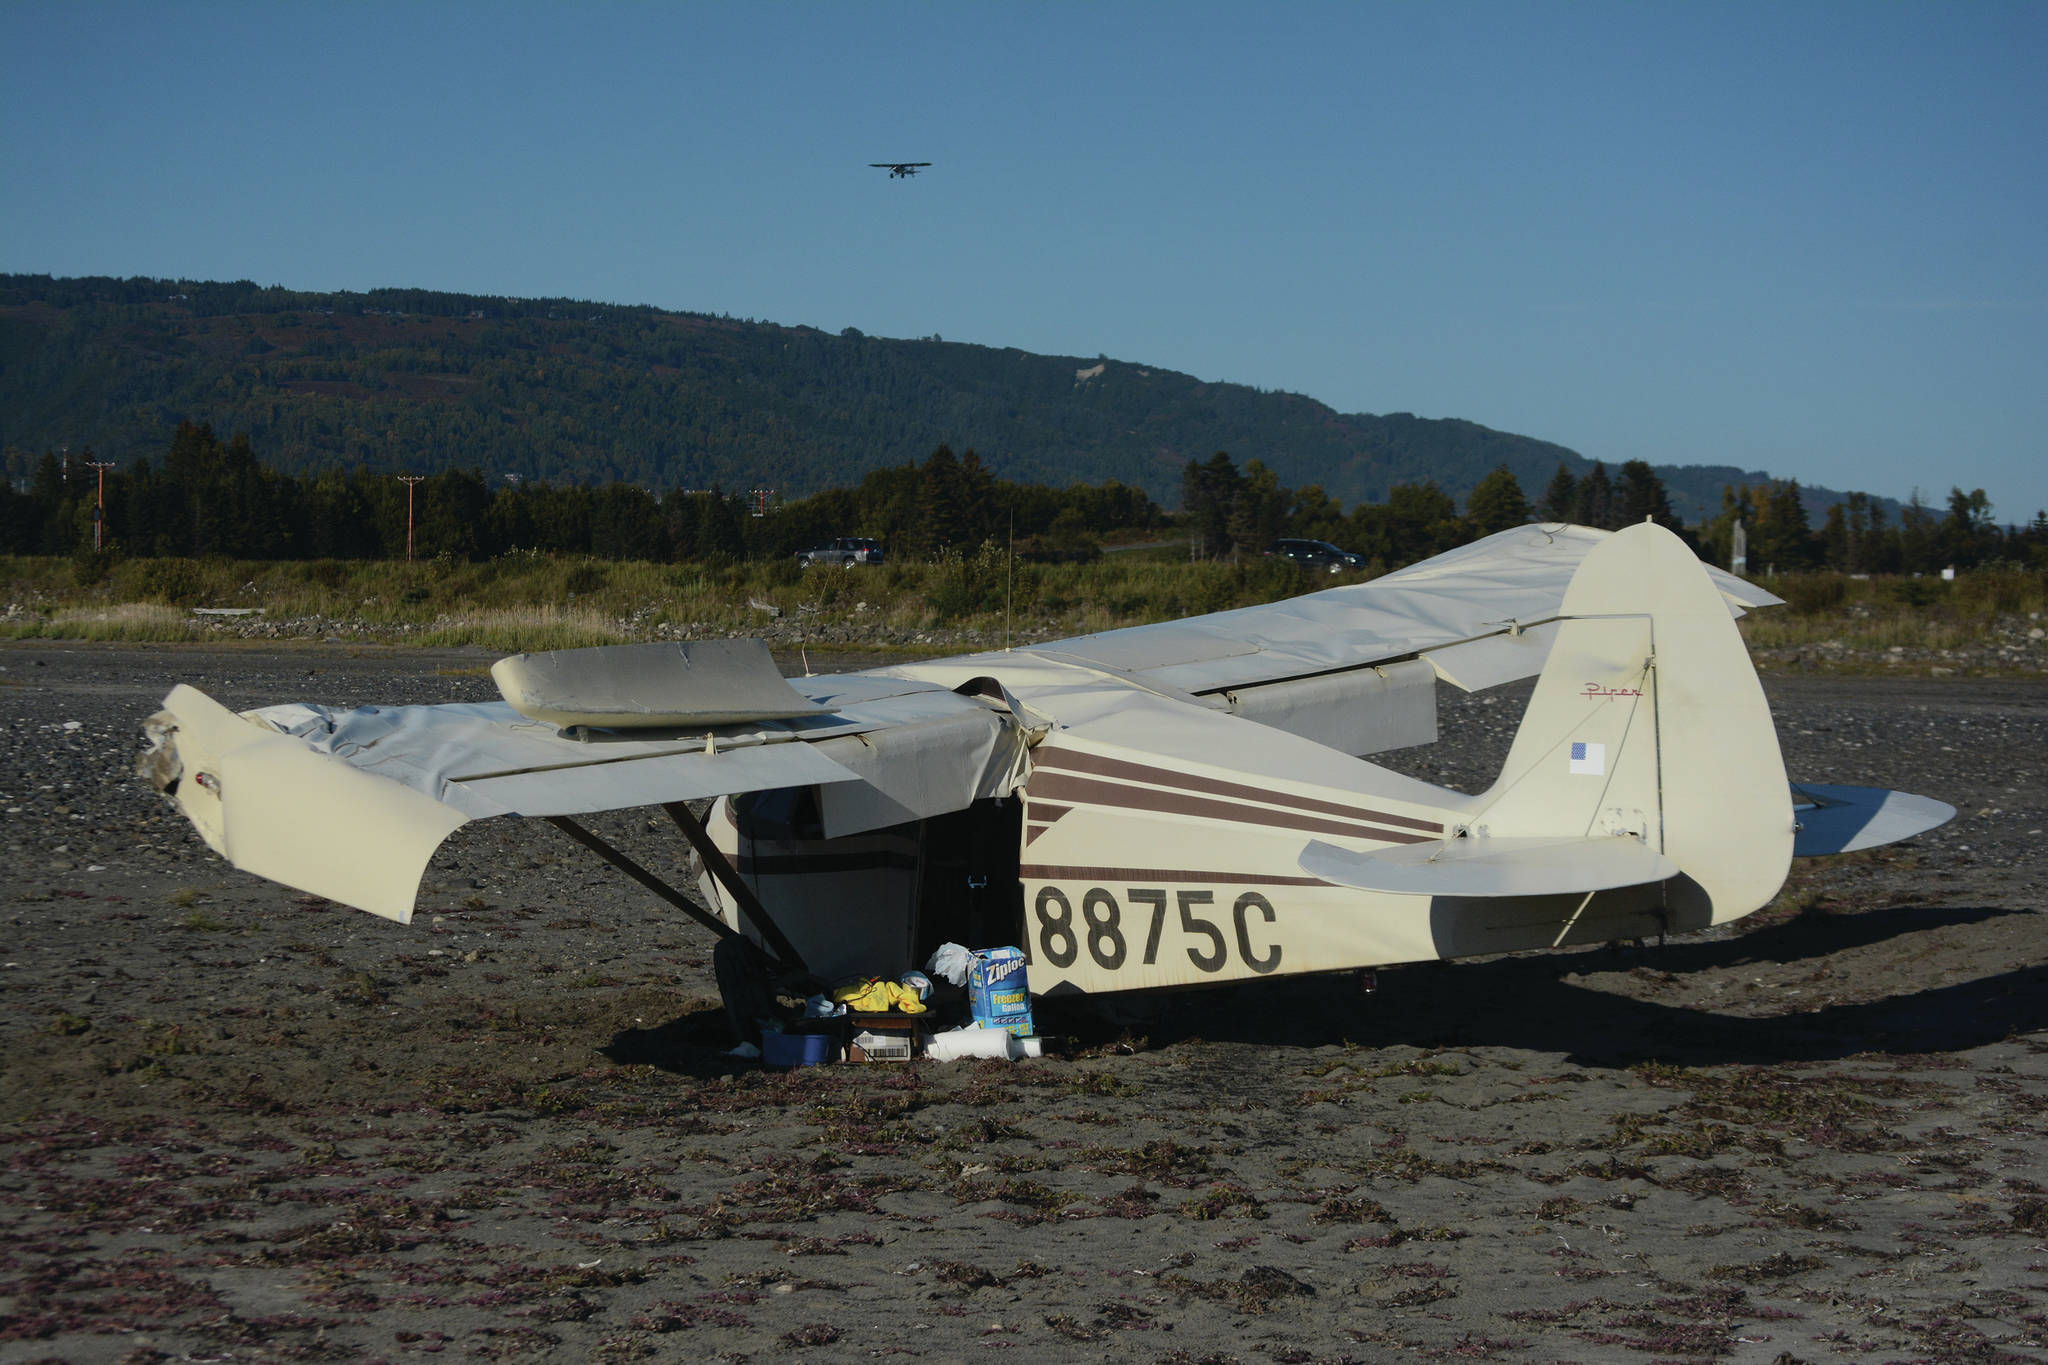 A crashed Piper 22-135 single-engine airplane lies on the mud flats of Mariner Park Slough at about 5:30 p.m. Sunday, Sept. 13, 2020, after it crashed about 45 minutes earlier on takeoff near the Homer, Alaska, Airport. The pilot and only person on board suffered minor injuries. (PHoto by Michael Armstrong/Homer News)